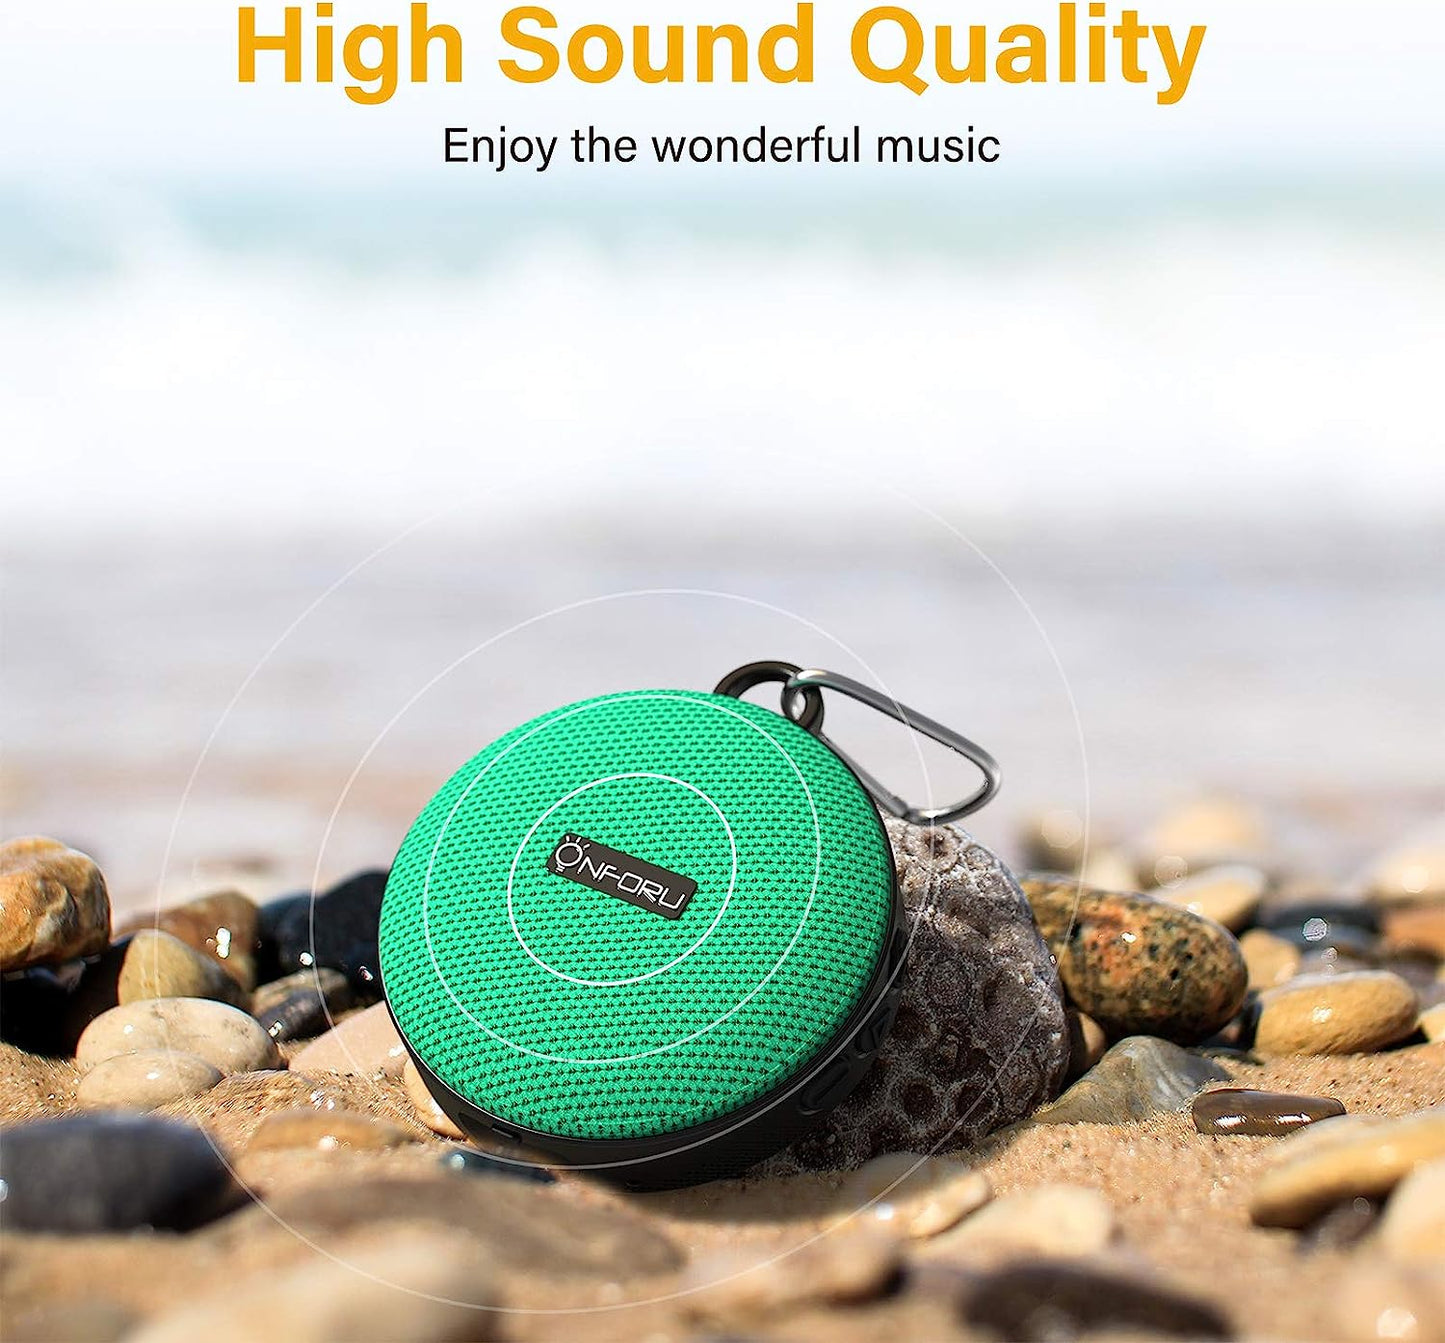 Portable Bluetooth Speaker for Bike, Wireless Bicycle Speaker with Loud Sound, Bluetooth 5.0 and 10h Play Time, IP65 Waterproof Mini Green Outdoor Speaker for Riding, Hiking and Camping